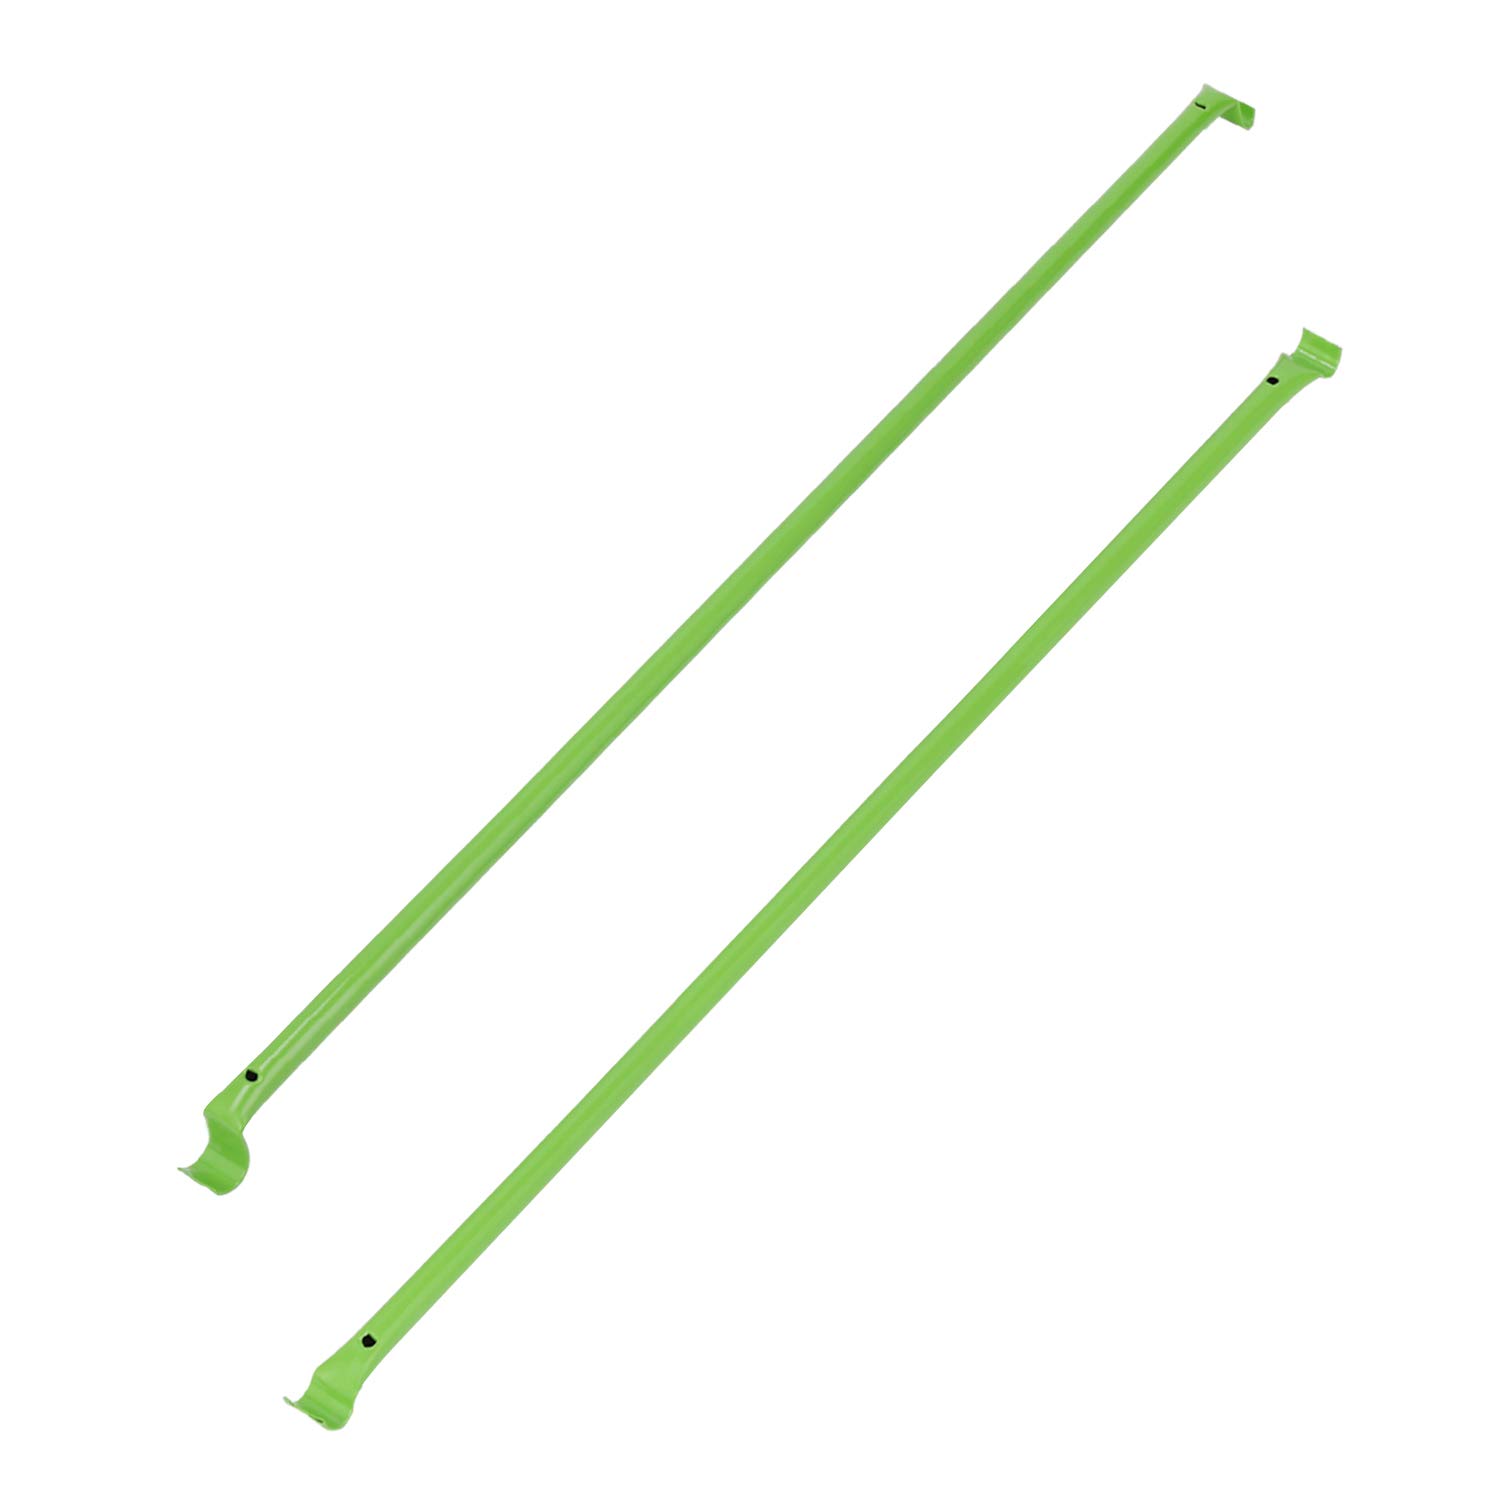 Vivosun Grow Tent Support Pole, Hanging Bar For 4 By 4 Tent